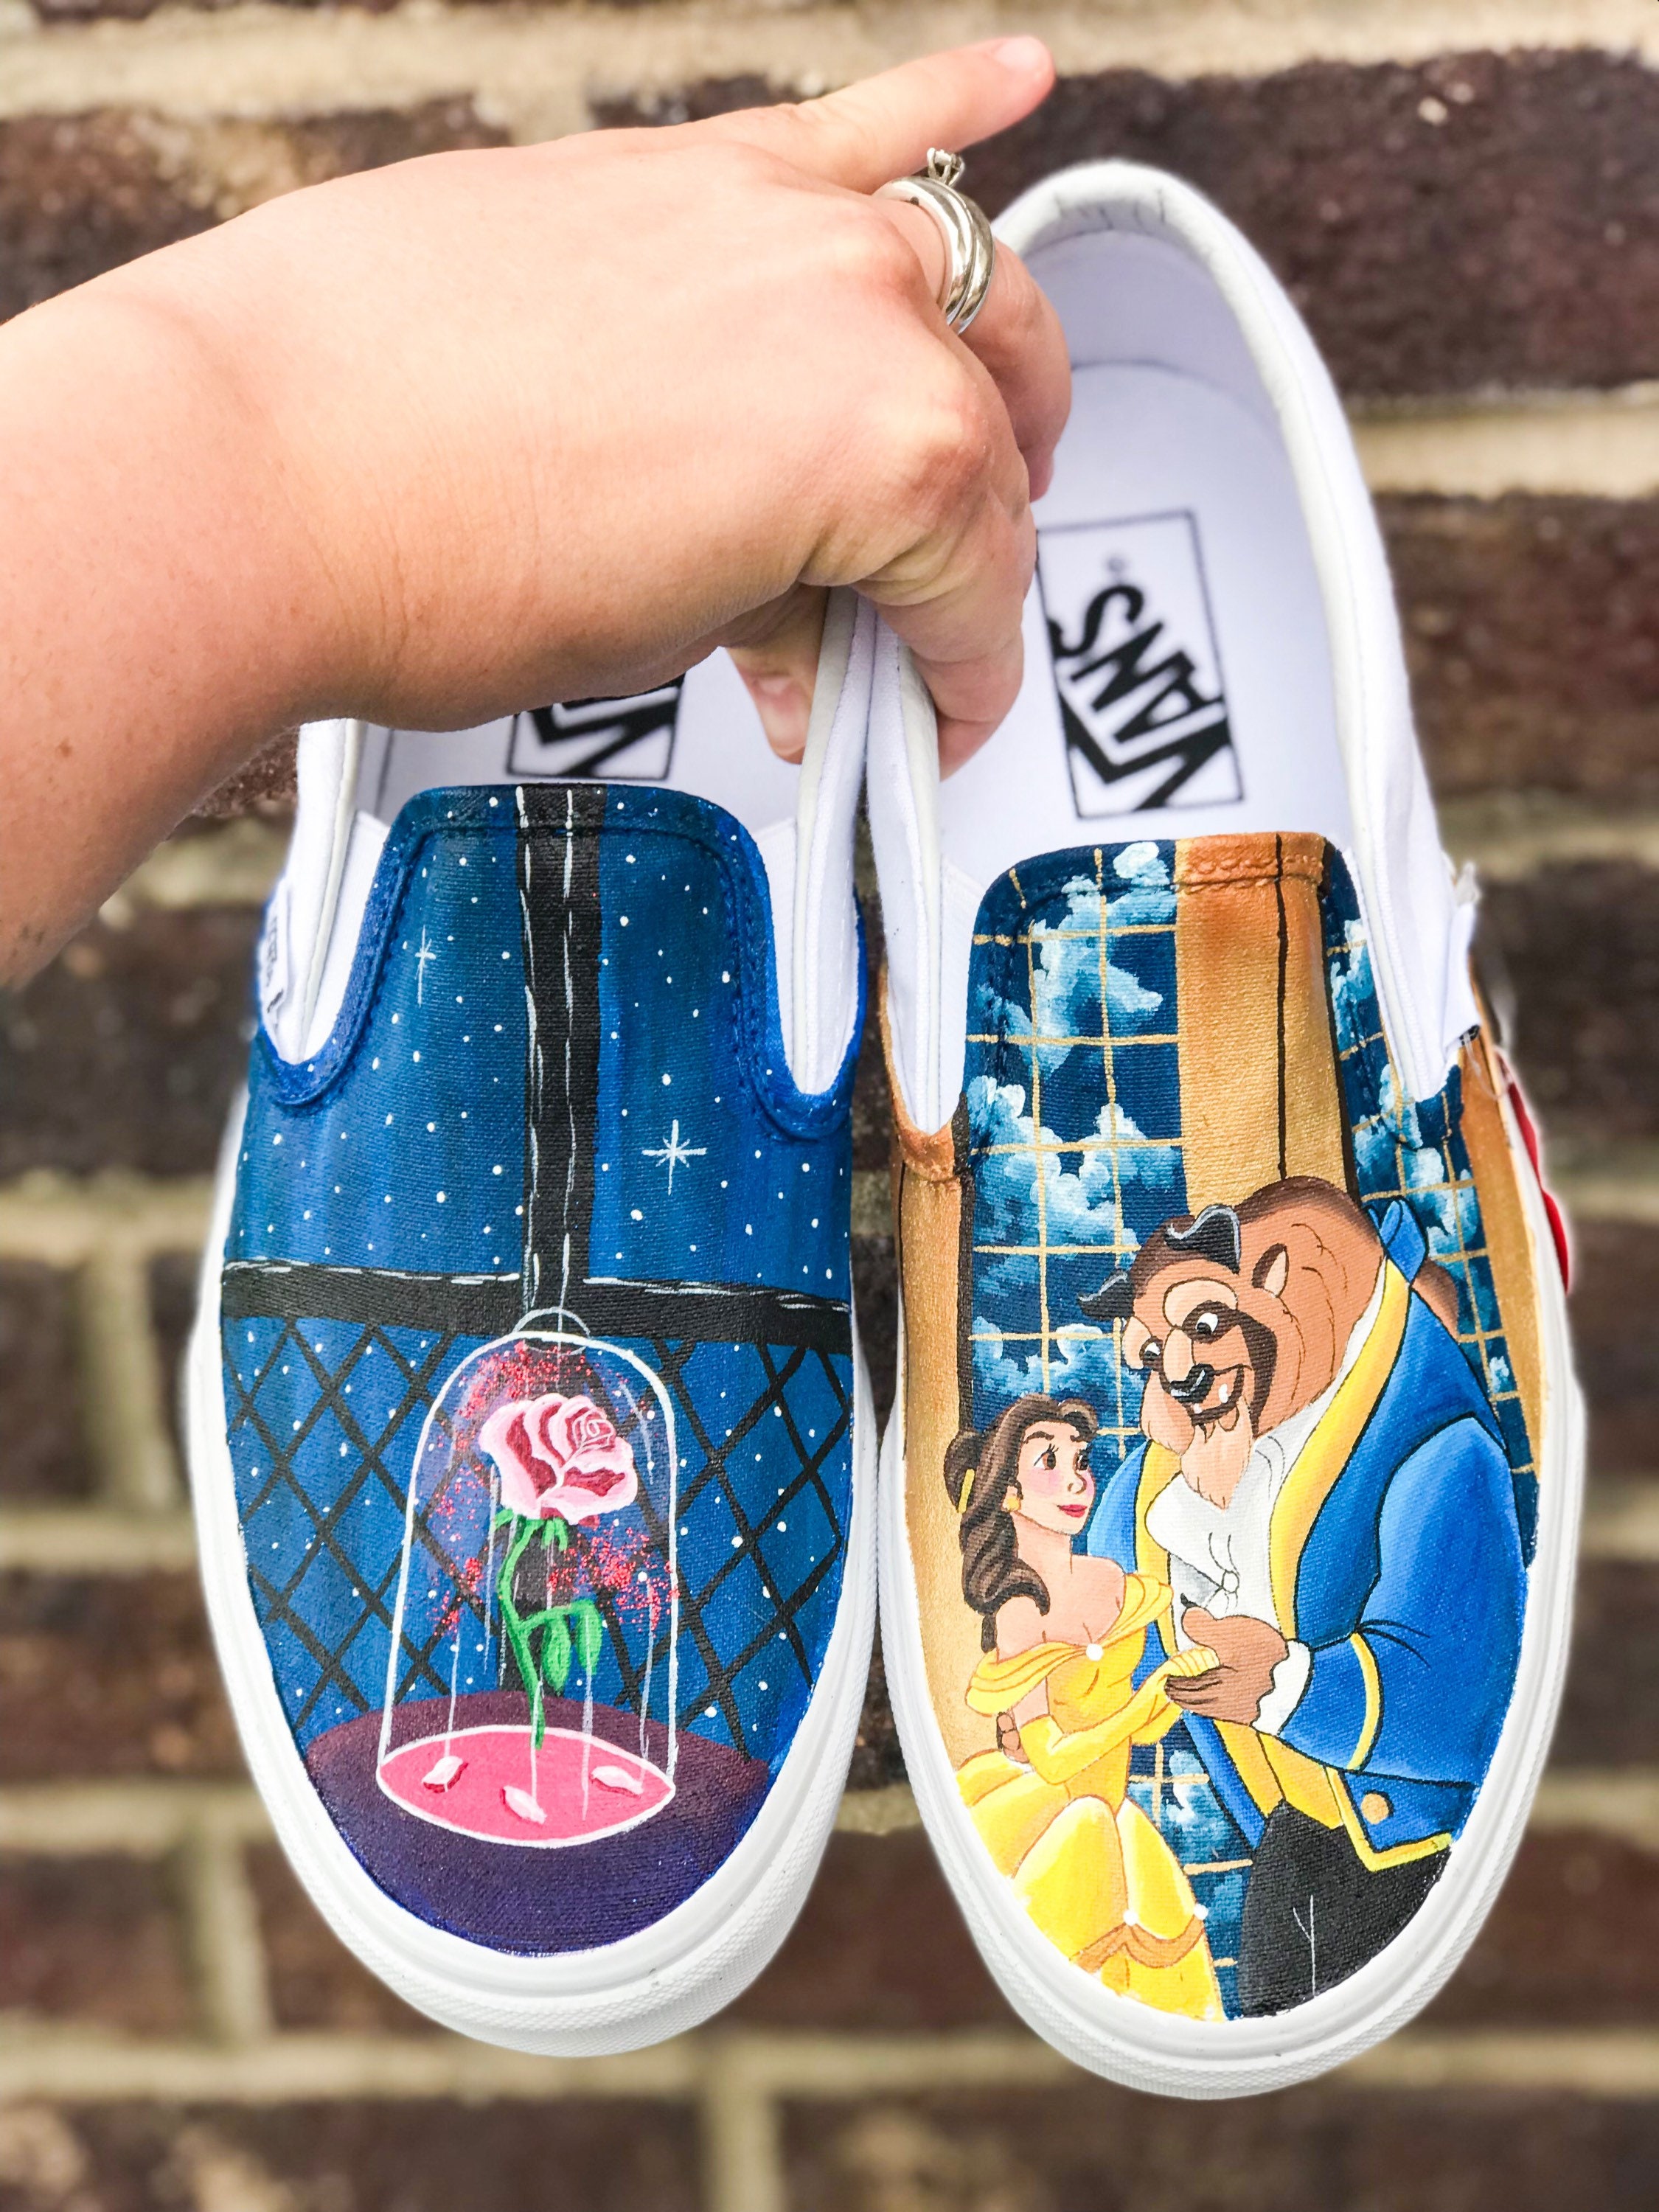 Beauty and the beast painted shoes disney painted shoes